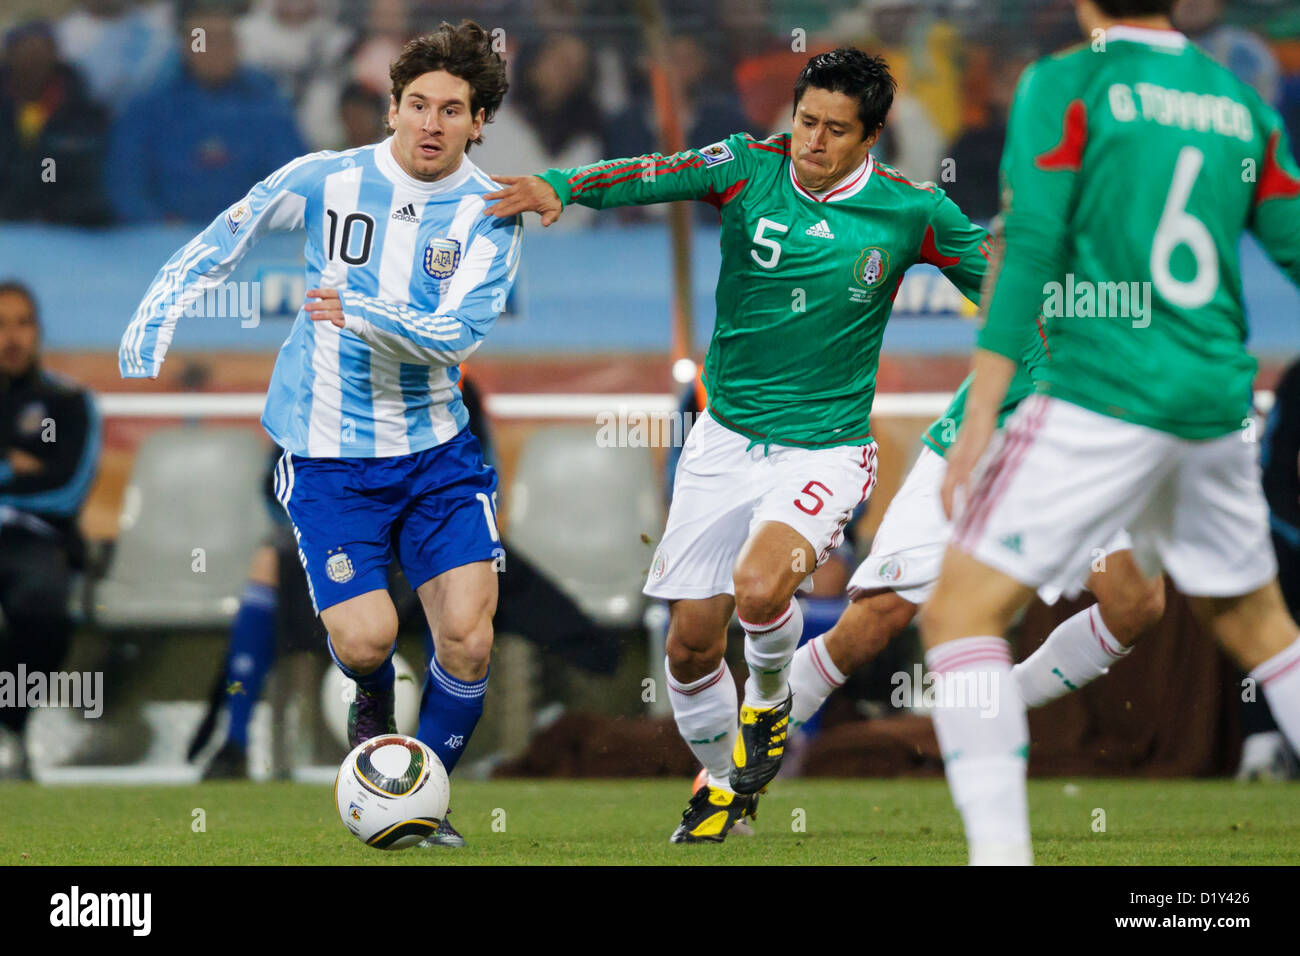 Lionel Messi of Argentina (10) looks for space against Ricardo Osorio of Mexico (5) during a FIFA World Cup round of 16 match. Stock Photo